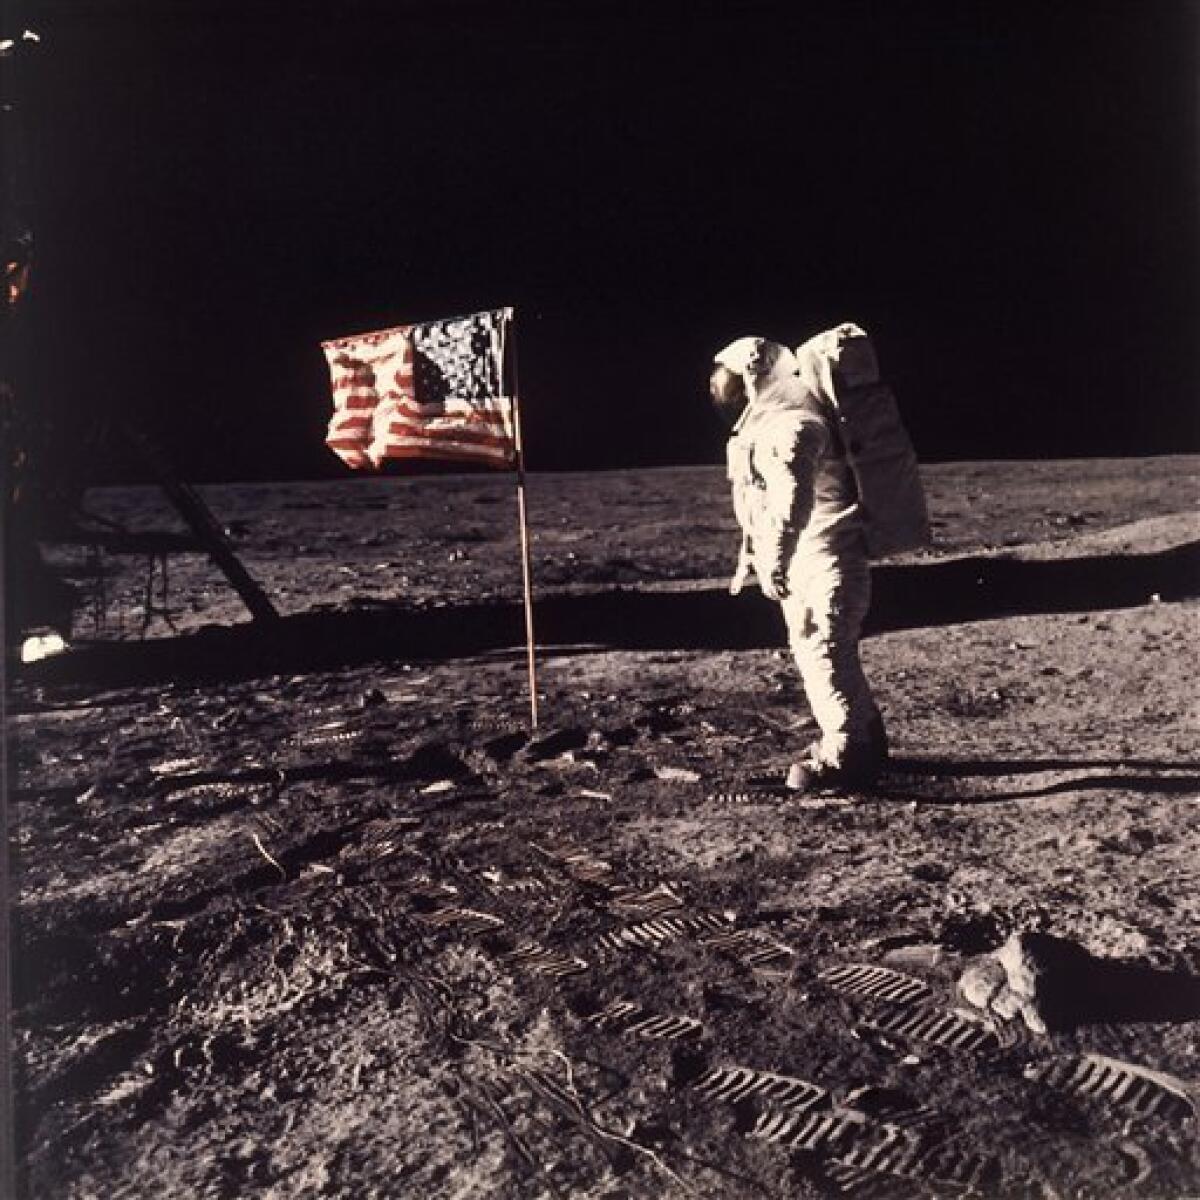 Edwin E. "Buzz" Aldrin Jr. posed for a photograph beside the U.S. flag placed on the moon during the Apollo 11 mission on July 20, 1968. Aldrin and fellow astronaut Neil Armstrong spent nearly three hours walking on the moon, collecting samples, conducting experiments and taking photographs. In all, 12 Americans walked on the moon from 1969 to 1972.